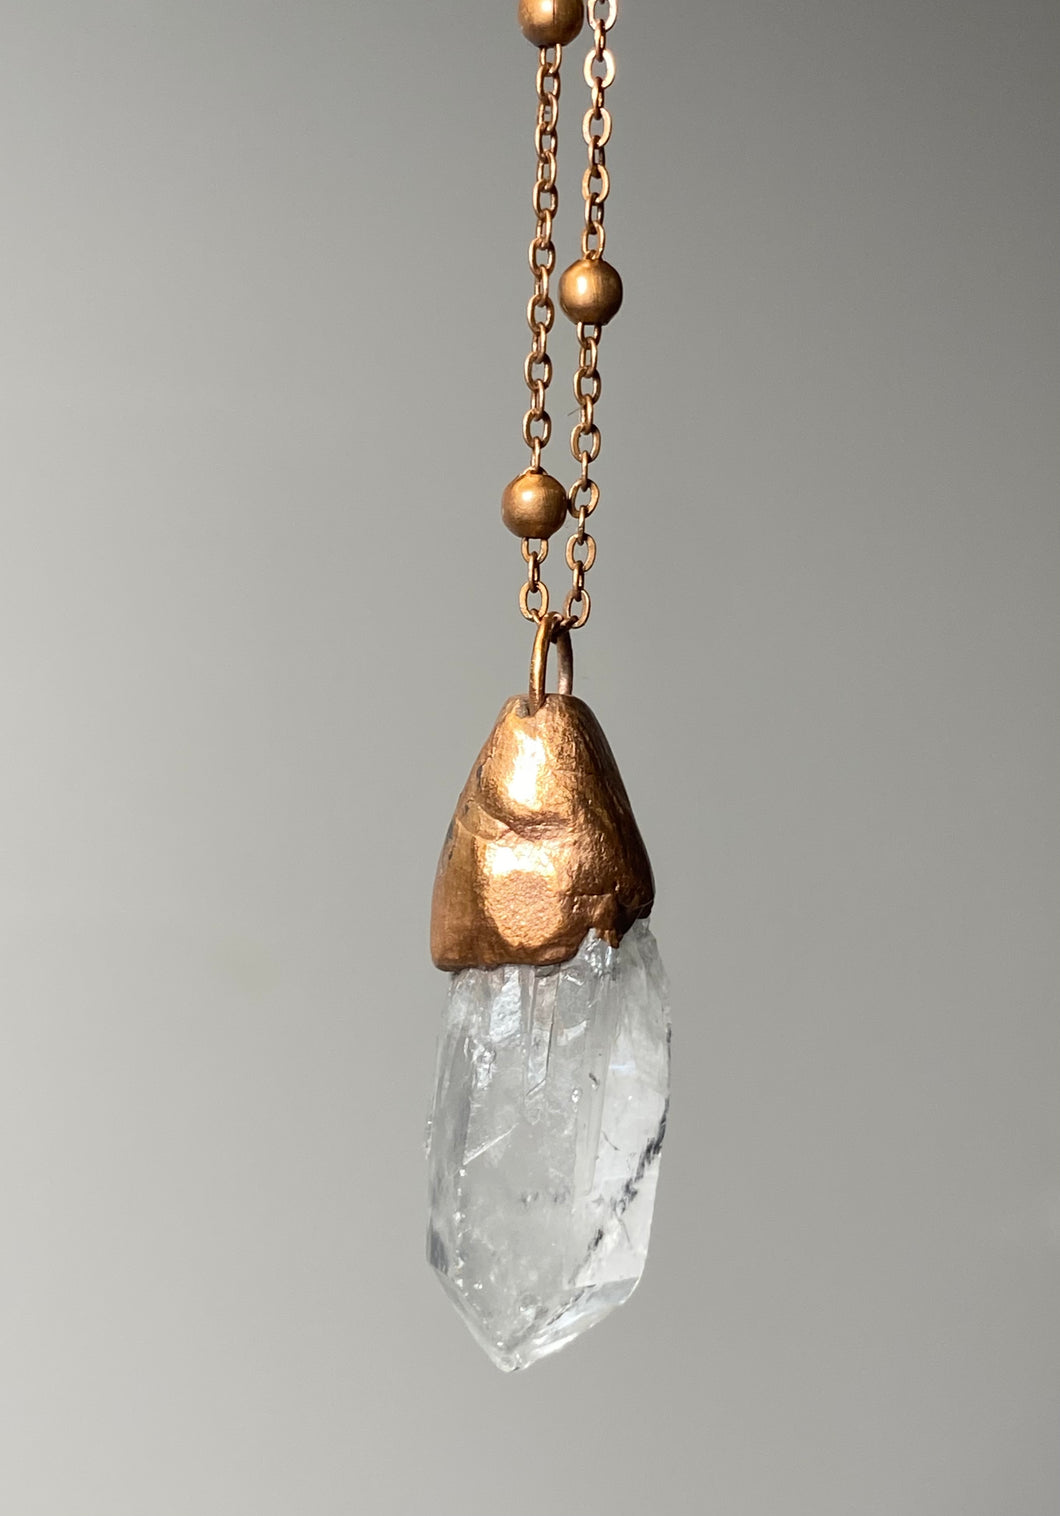 Copper-plated Crystal Pendant Necklace